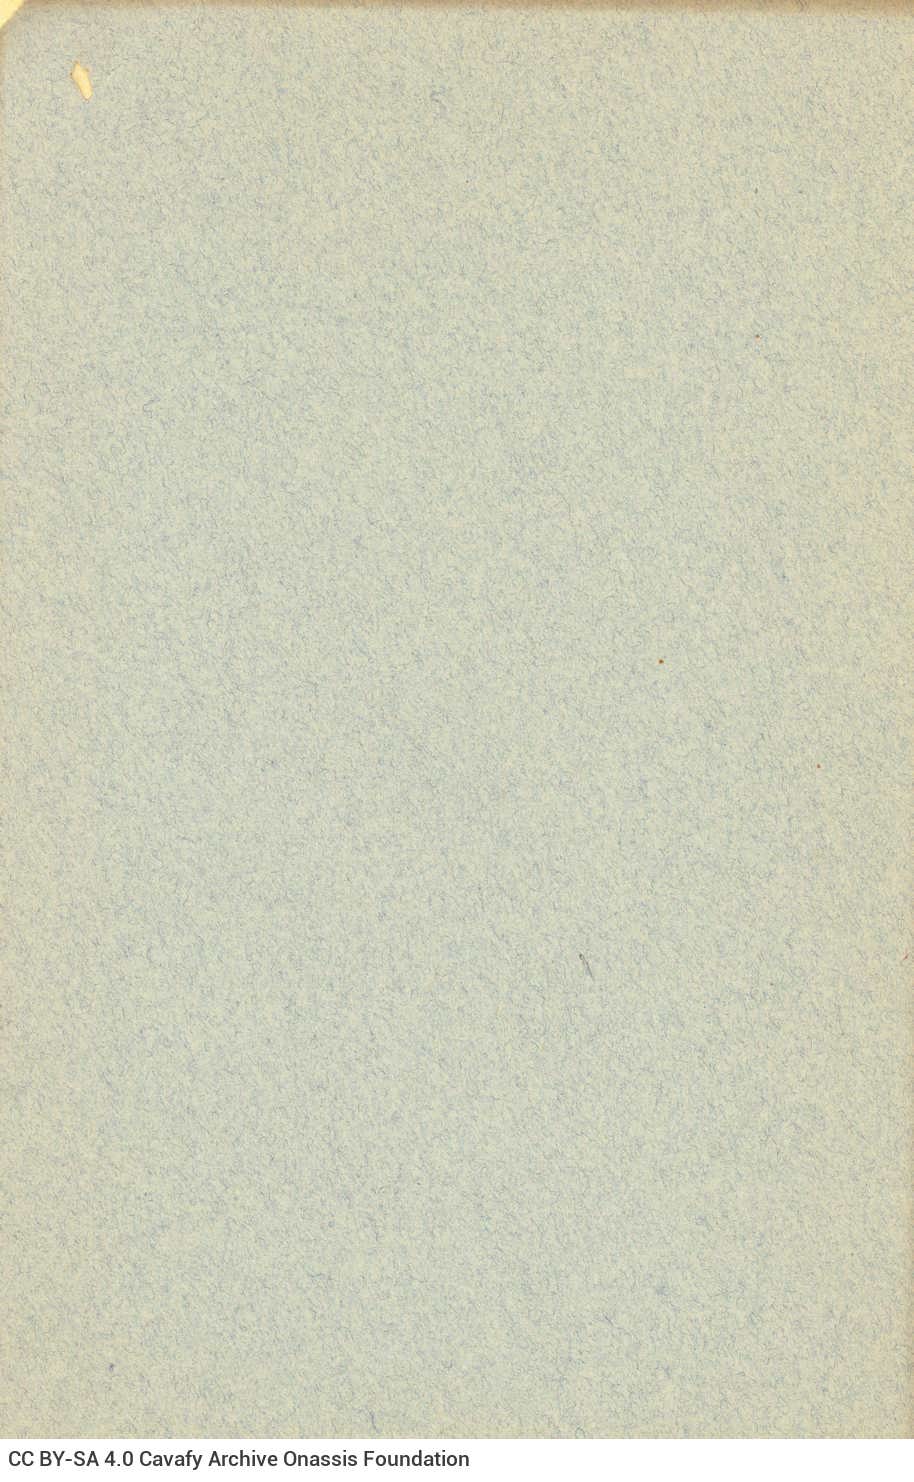 Collection of poems by Cavafy (Γ4) comprising approximately 30 bound broad sheets with 26 poems. Cover of paperboard, bearin